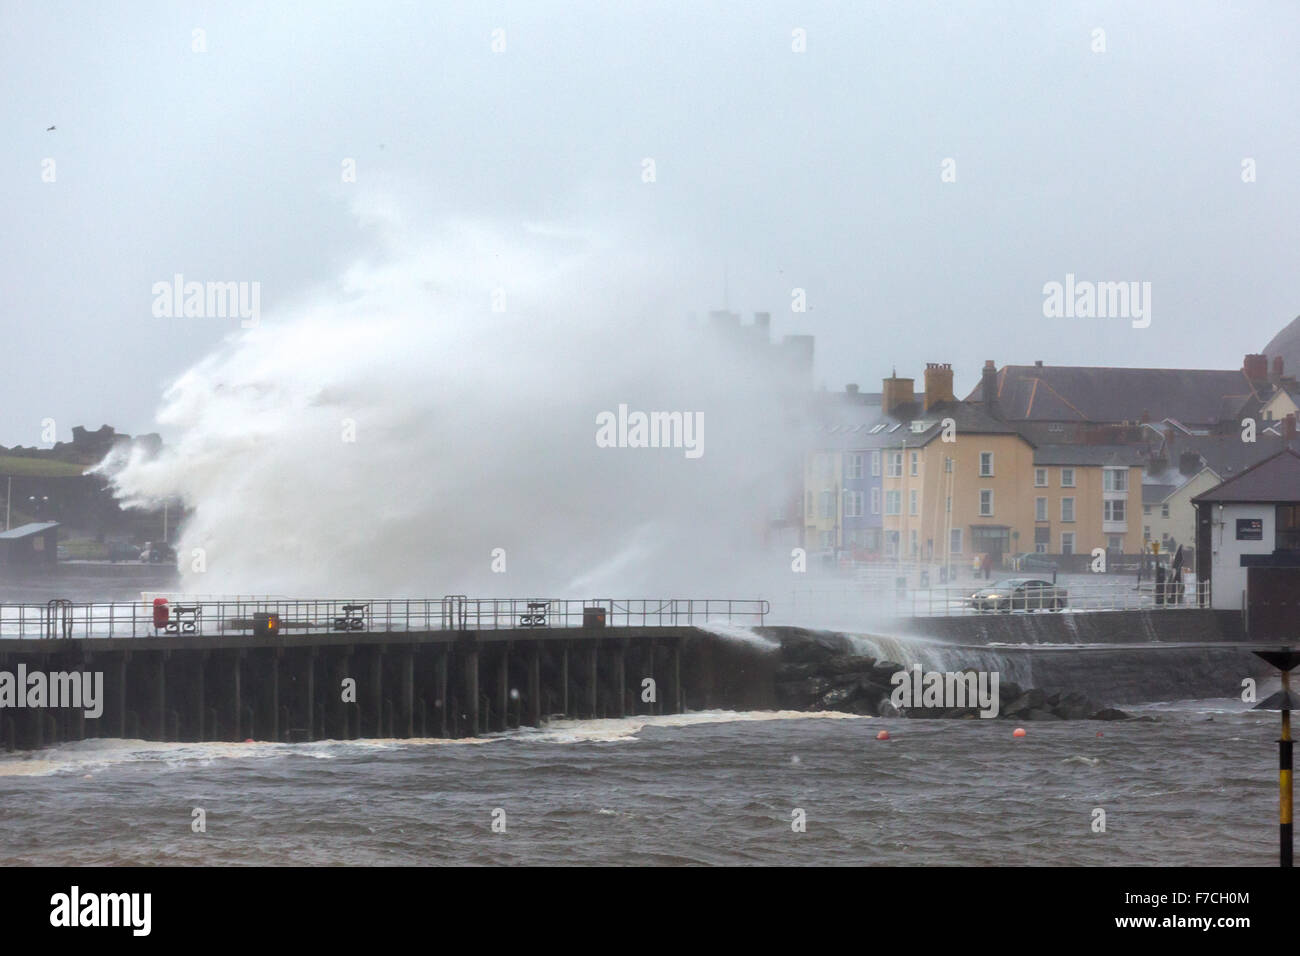 Aberystwyth, Wales, UK. 29th November 2015 Big waves batter Aberystwyth this morning as storm Clodagh combined with high tide unleash natures power. Credit:  Ian Jones/Alamy Live News Stock Photo